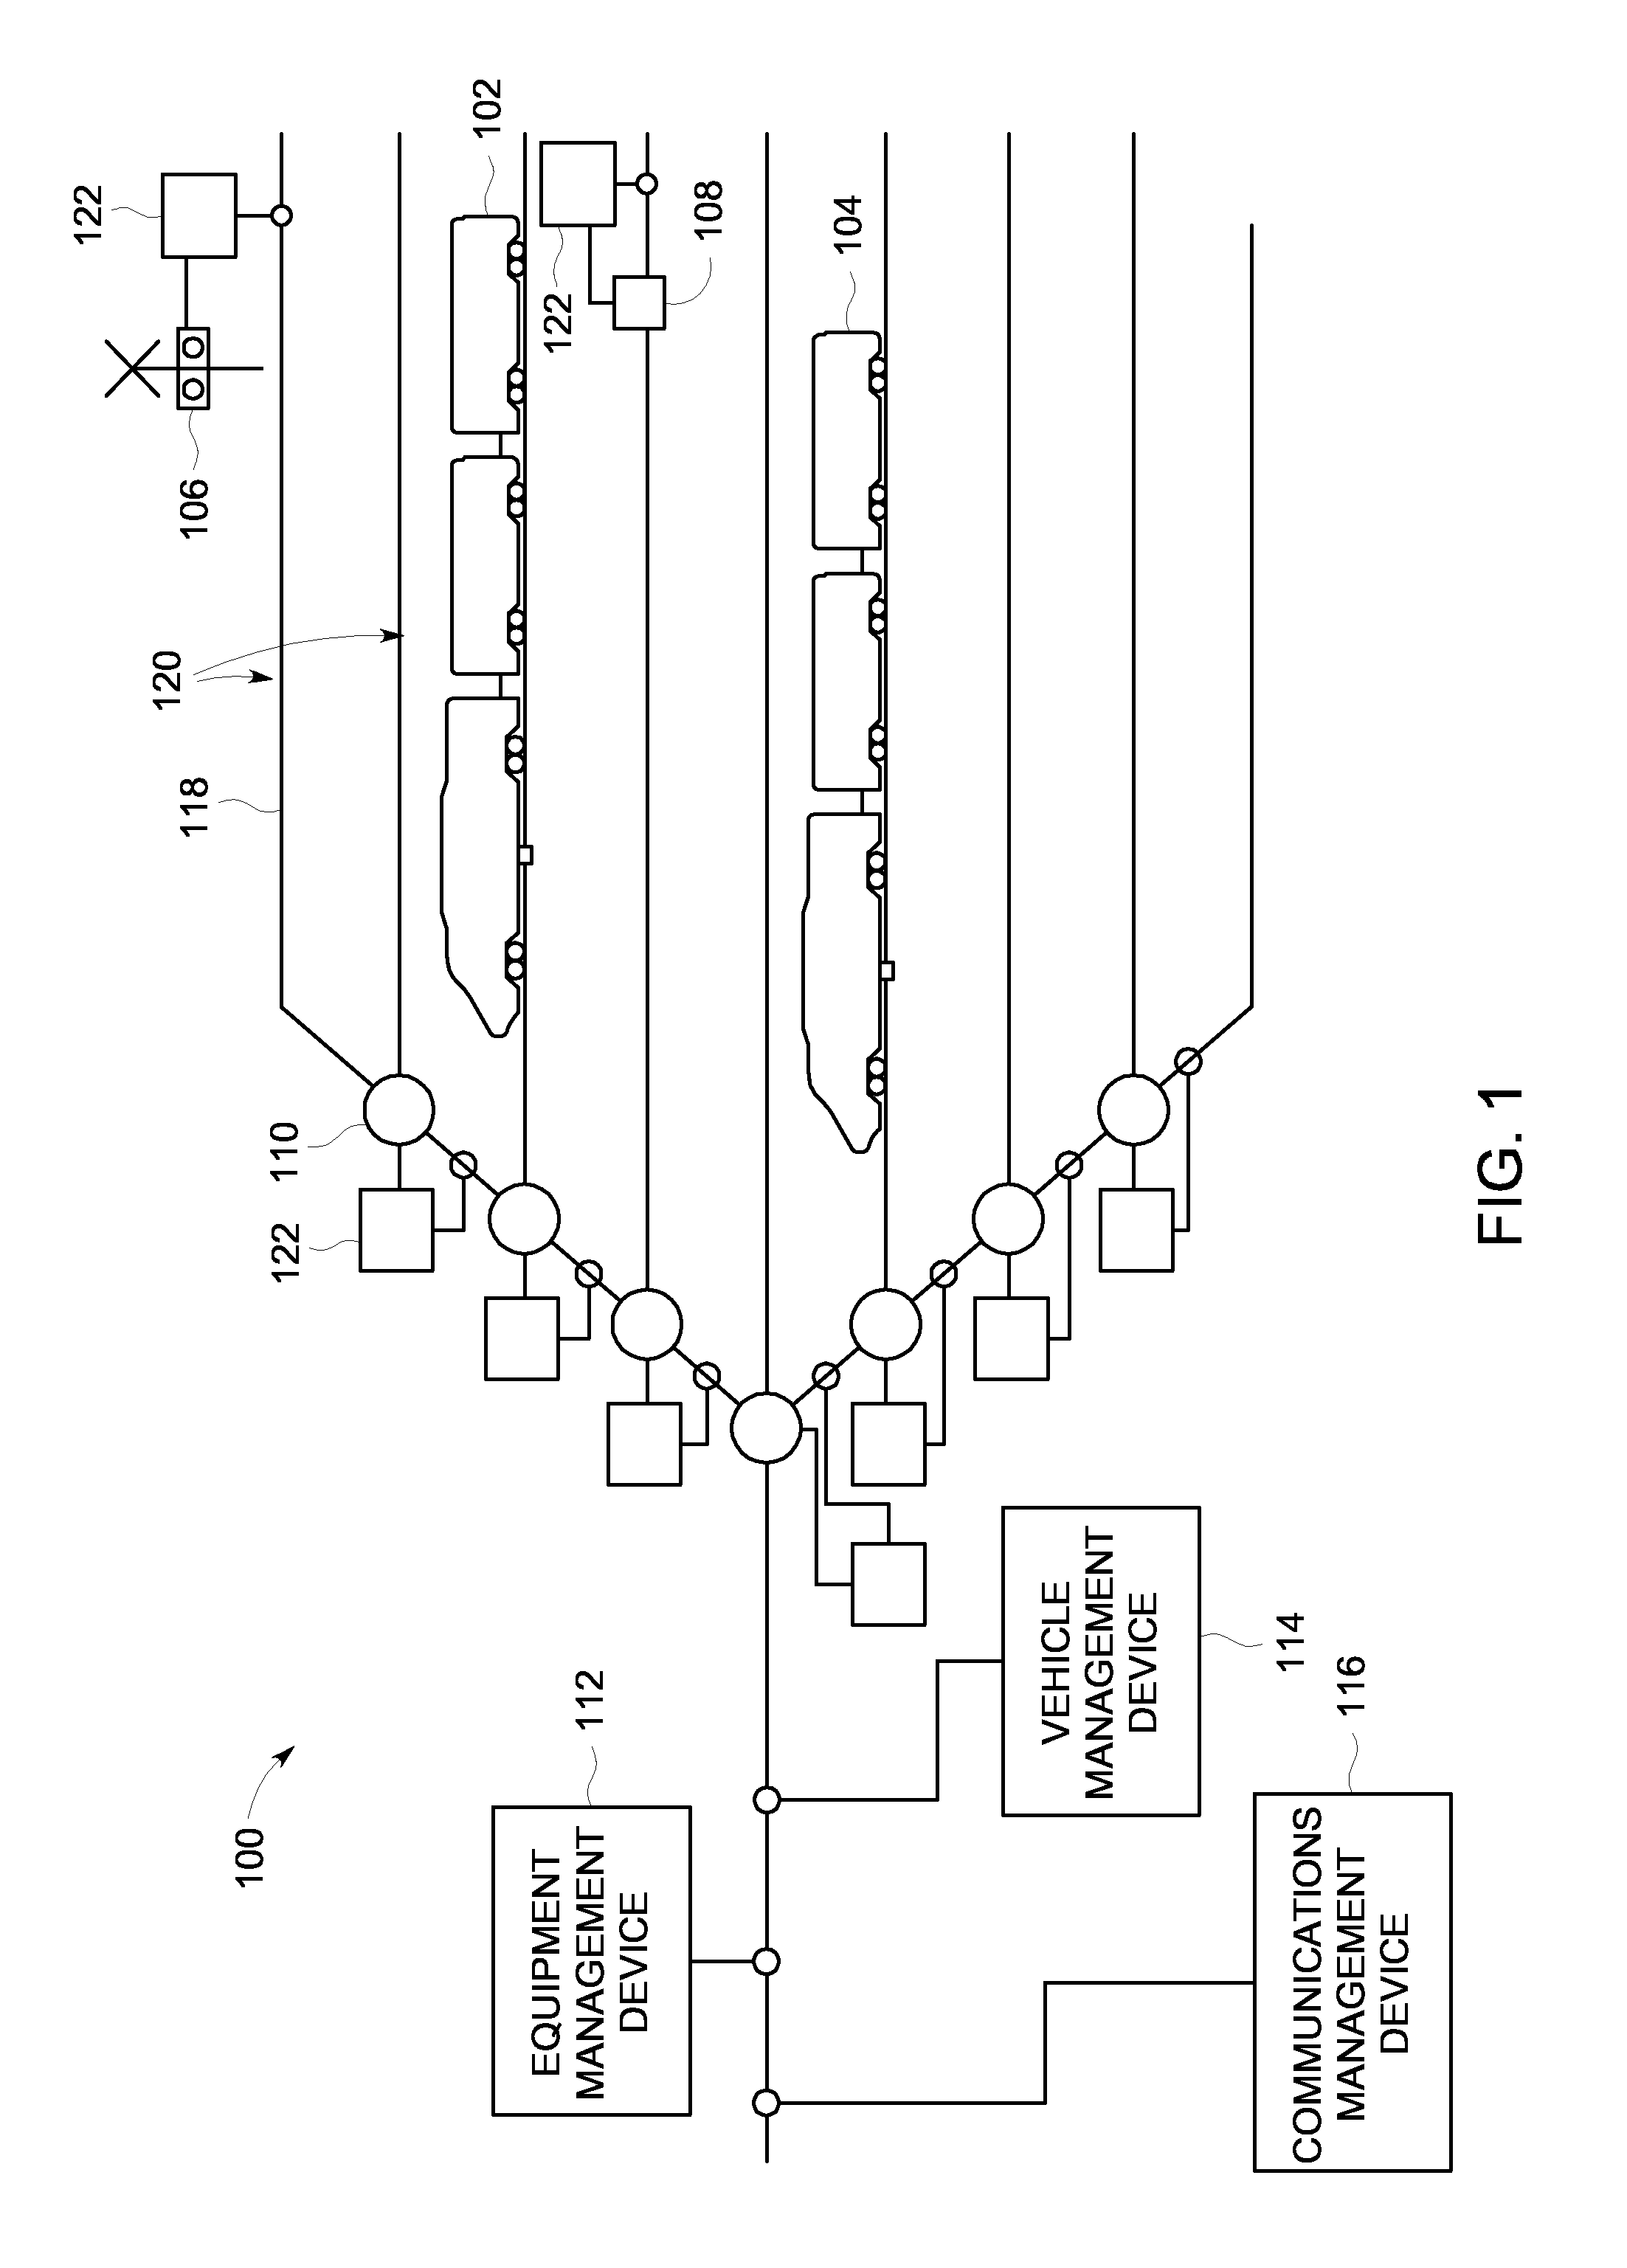 Rail communication system and method for communicating with a rail vehicle